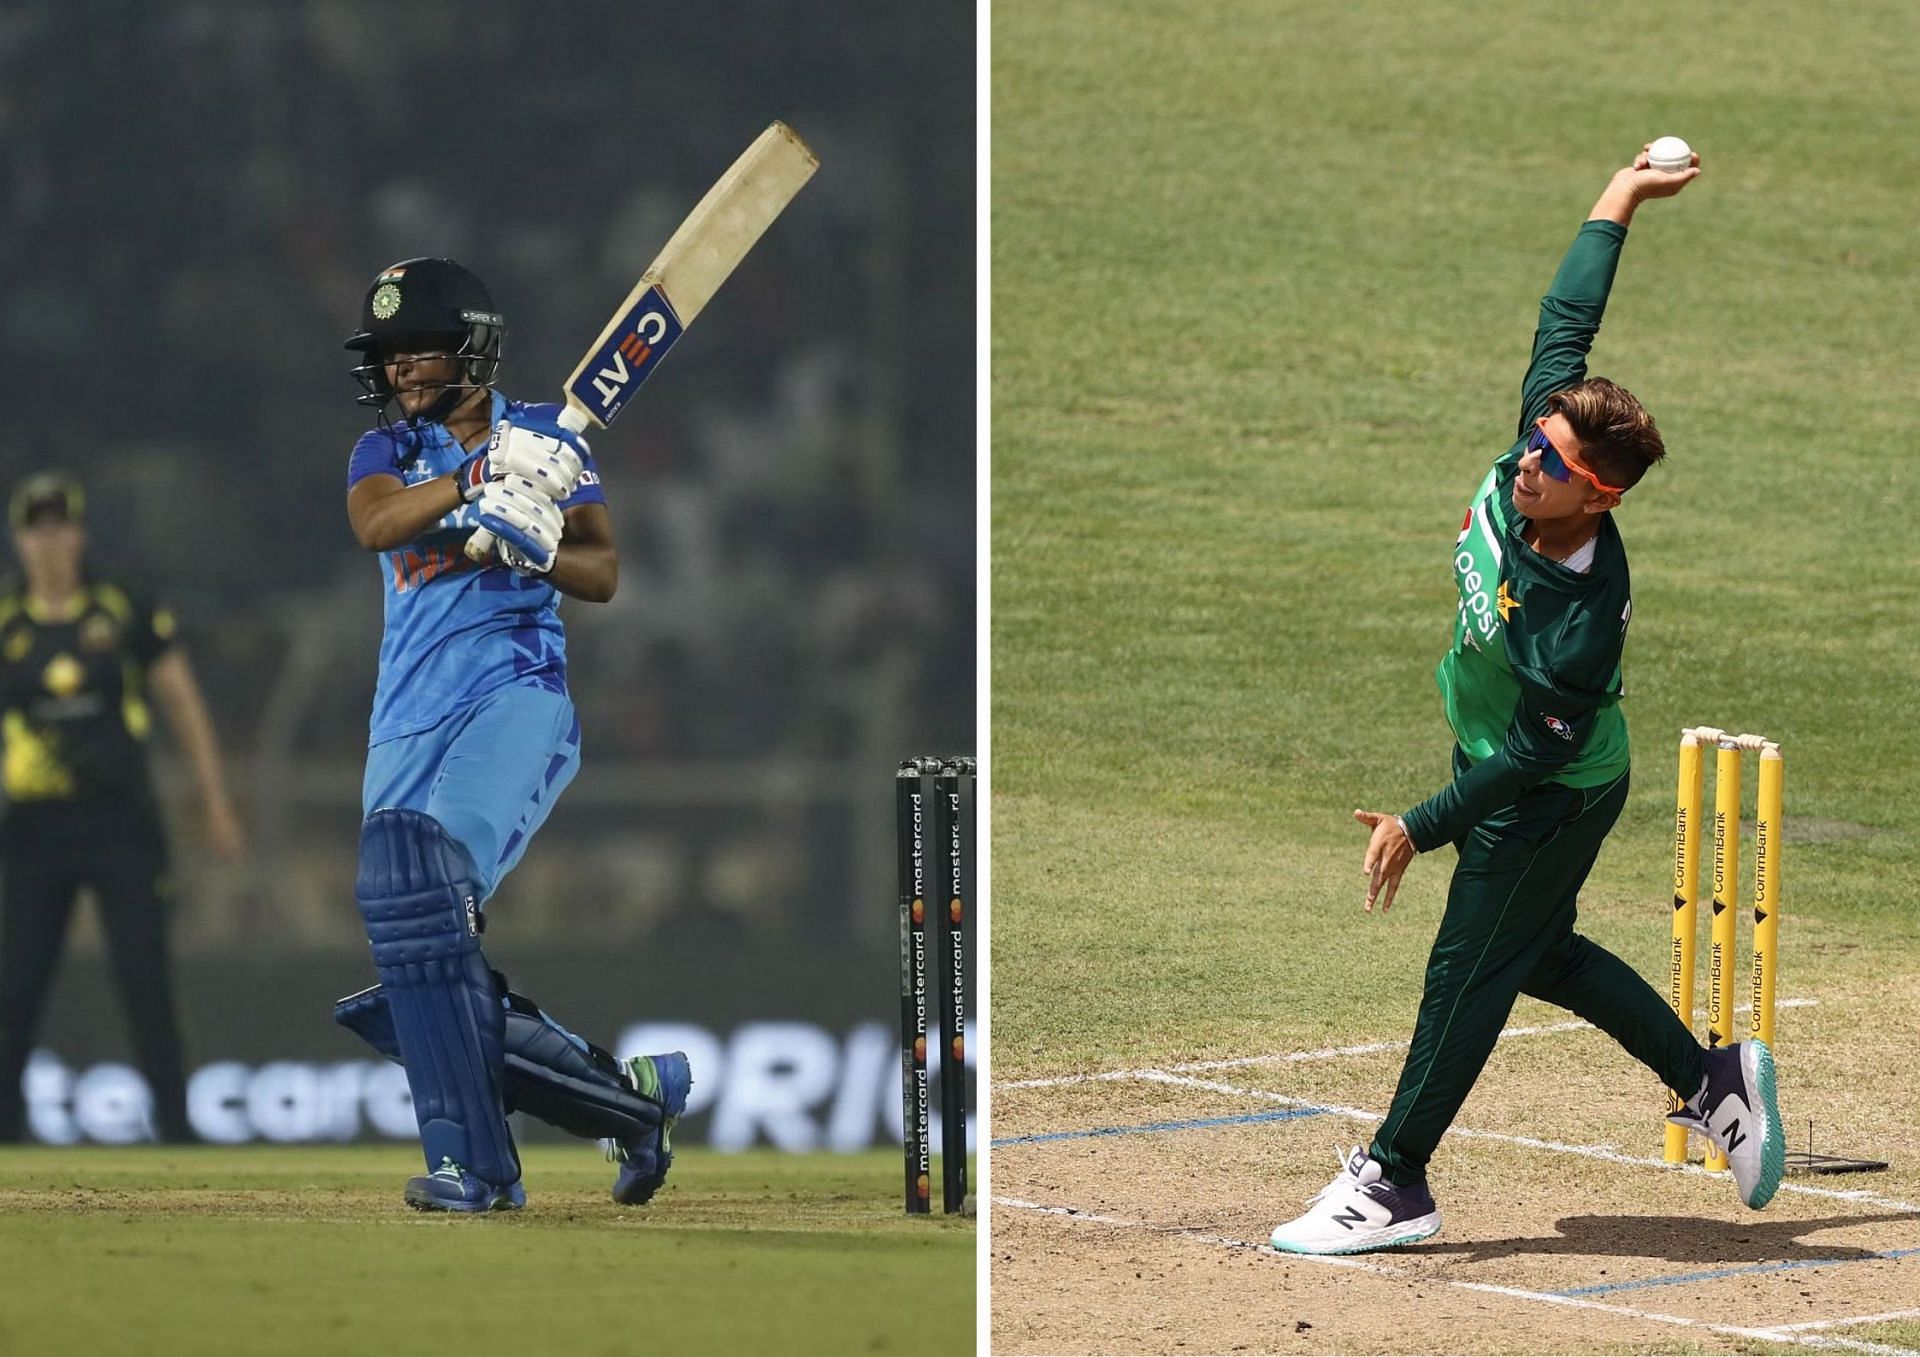 India and Pakistan will battle it out in what promises to be a cracking contest in Cape Town!